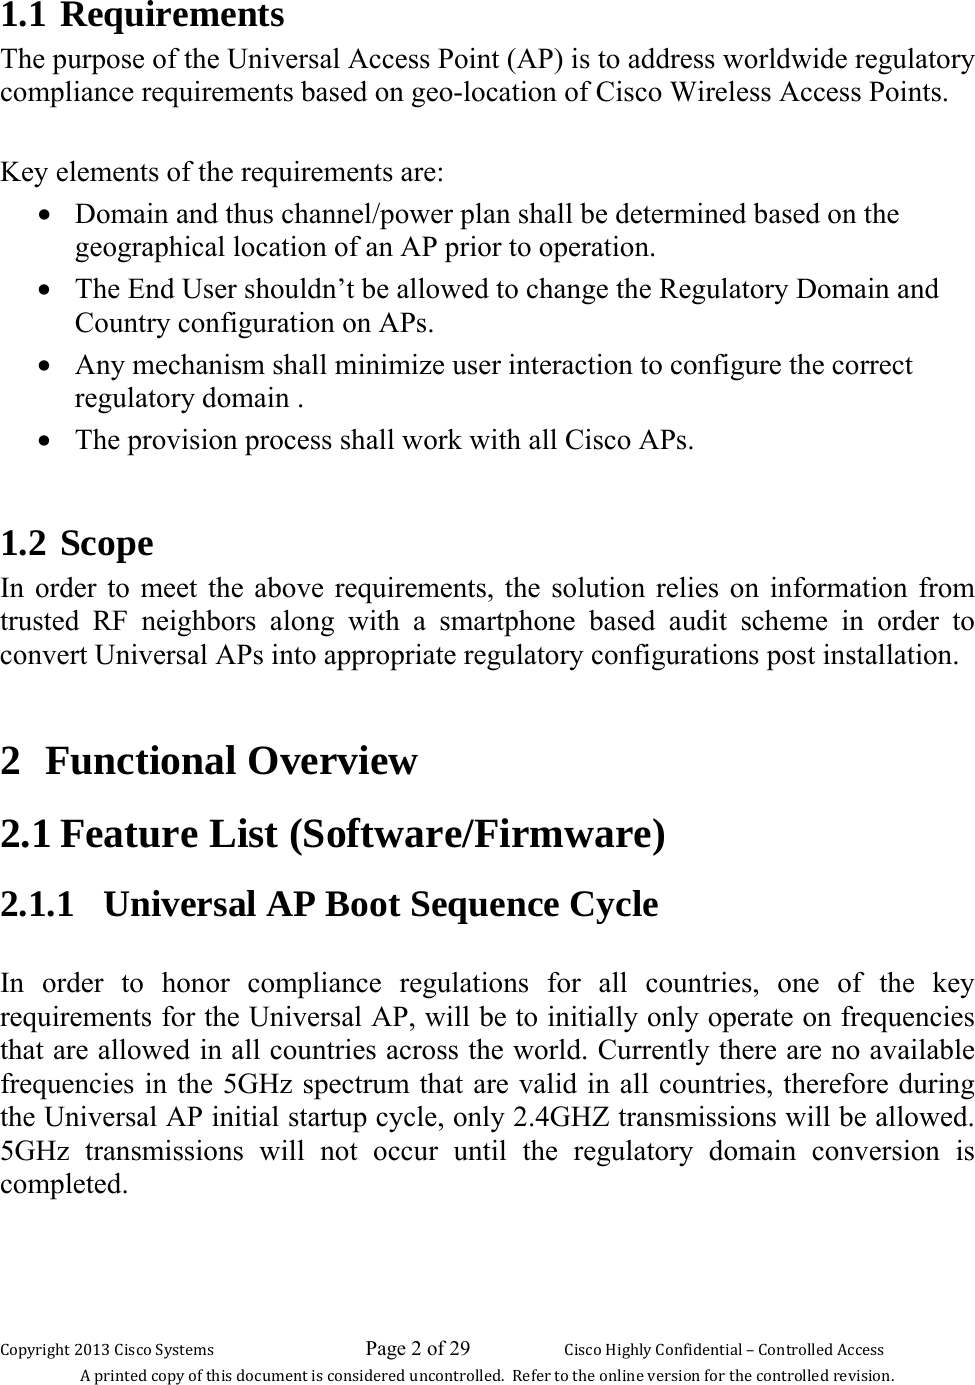 Copyright 2013 Cisco Systems                             Page 2 of 29                     Cisco Highly Confidential – Controlled Access A printed copy of this document is considered uncontrolled.  Refer to the online version for the controlled revision. 1.1 Requirements The purpose of the Universal Access Point (AP) is to address worldwide regulatory compliance requirements based on geo-location of Cisco Wireless Access Points.   Key elements of the requirements are: • Domain and thus channel/power plan shall be determined based on the geographical location of an AP prior to operation. • The End User shouldn’t be allowed to change the Regulatory Domain and Country configuration on APs. • Any mechanism shall minimize user interaction to configure the correct regulatory domain . • The provision process shall work with all Cisco APs.  1.2 Scope In order to meet the above requirements, the solution relies on information from trusted RF neighbors along with a smartphone based audit scheme in order to convert Universal APs into appropriate regulatory configurations post installation.   2 Functional Overview 2.1 Feature List (Software/Firmware)  2.1.1   Universal AP Boot Sequence Cycle  In order to honor compliance regulations for all countries, one of the key requirements for the Universal AP, will be to initially only operate on frequencies that are allowed in all countries across the world. Currently there are no available frequencies in the 5GHz spectrum that are valid in all countries, therefore during the Universal AP initial startup cycle, only 2.4GHZ transmissions will be allowed. 5GHz transmissions will not occur until the regulatory domain conversion is completed.  